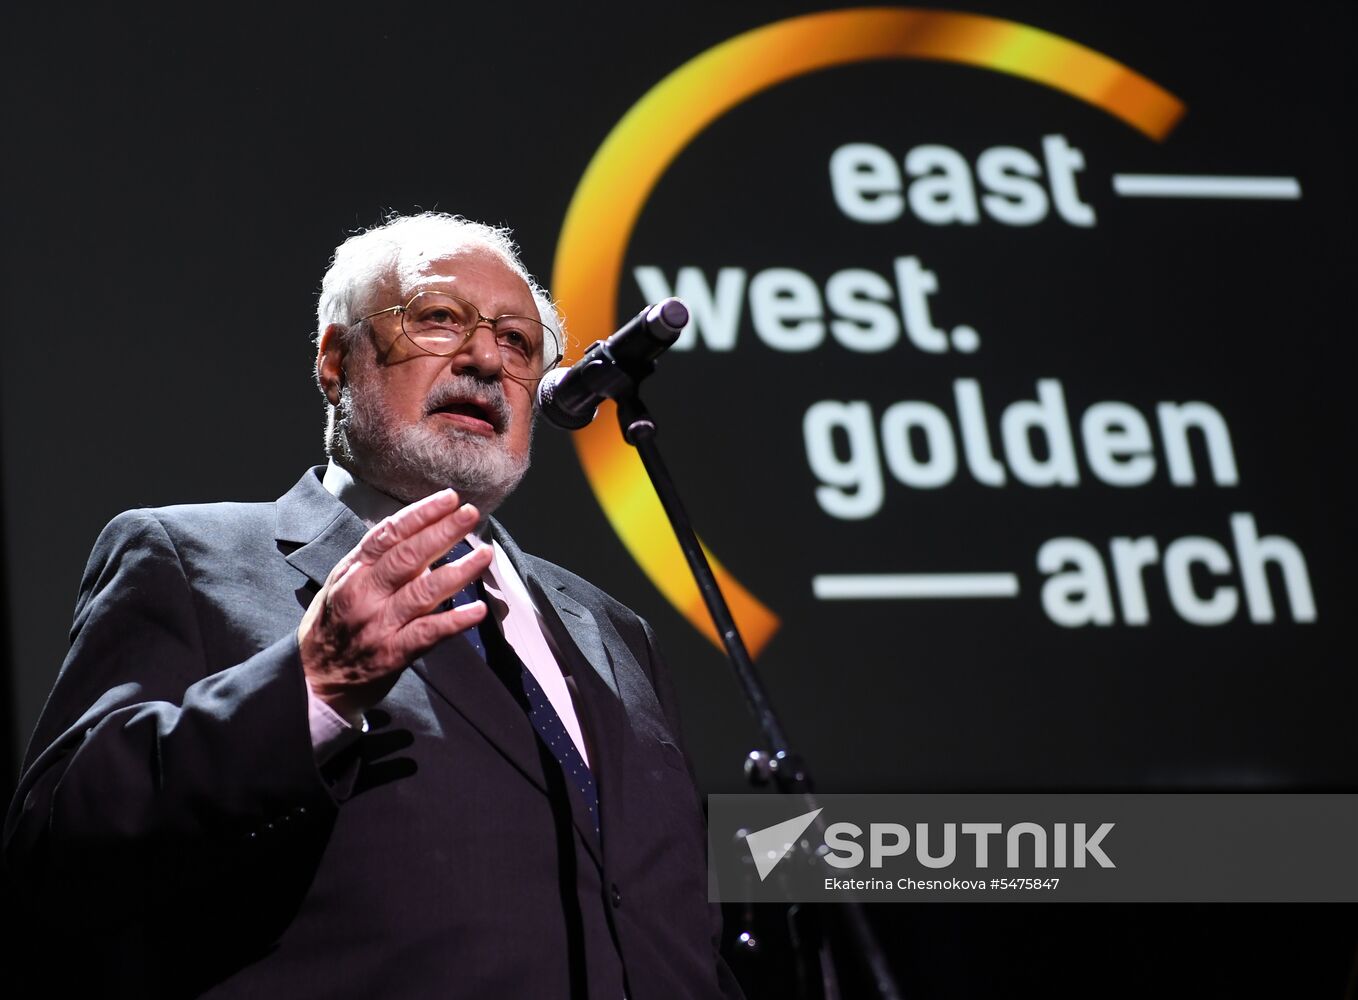 East-West: The Golden Arch first film award ceremony